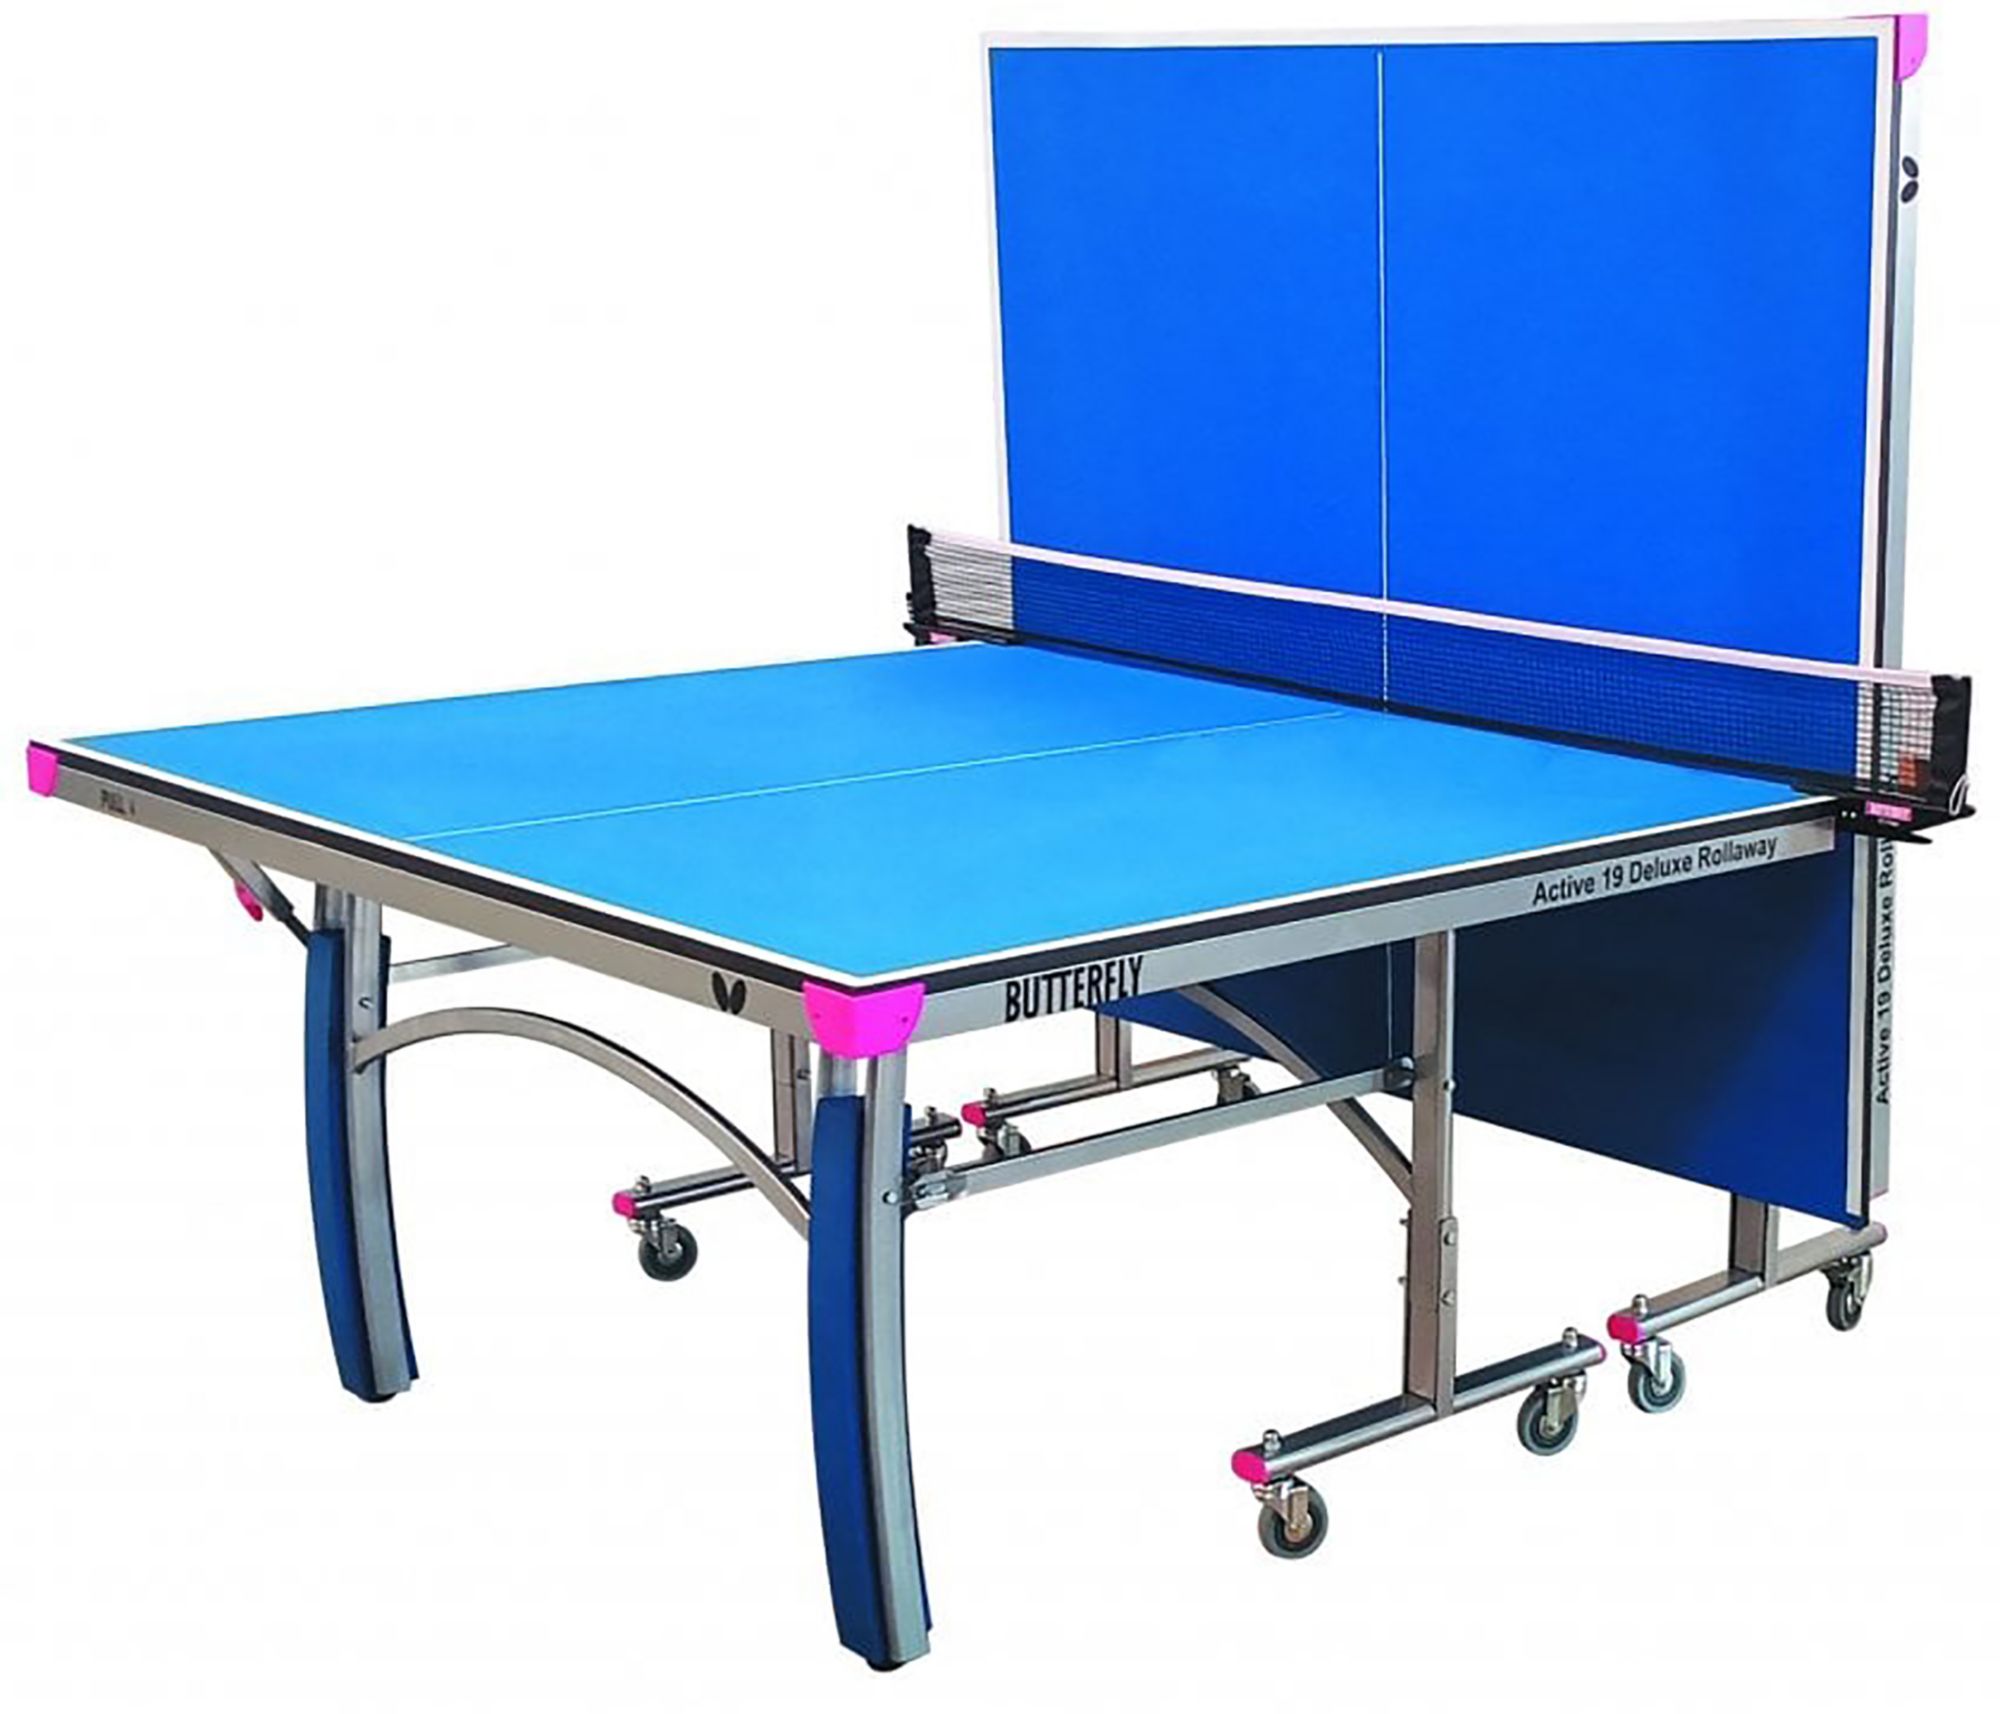 Butterfly Active 19 Deluxe Table